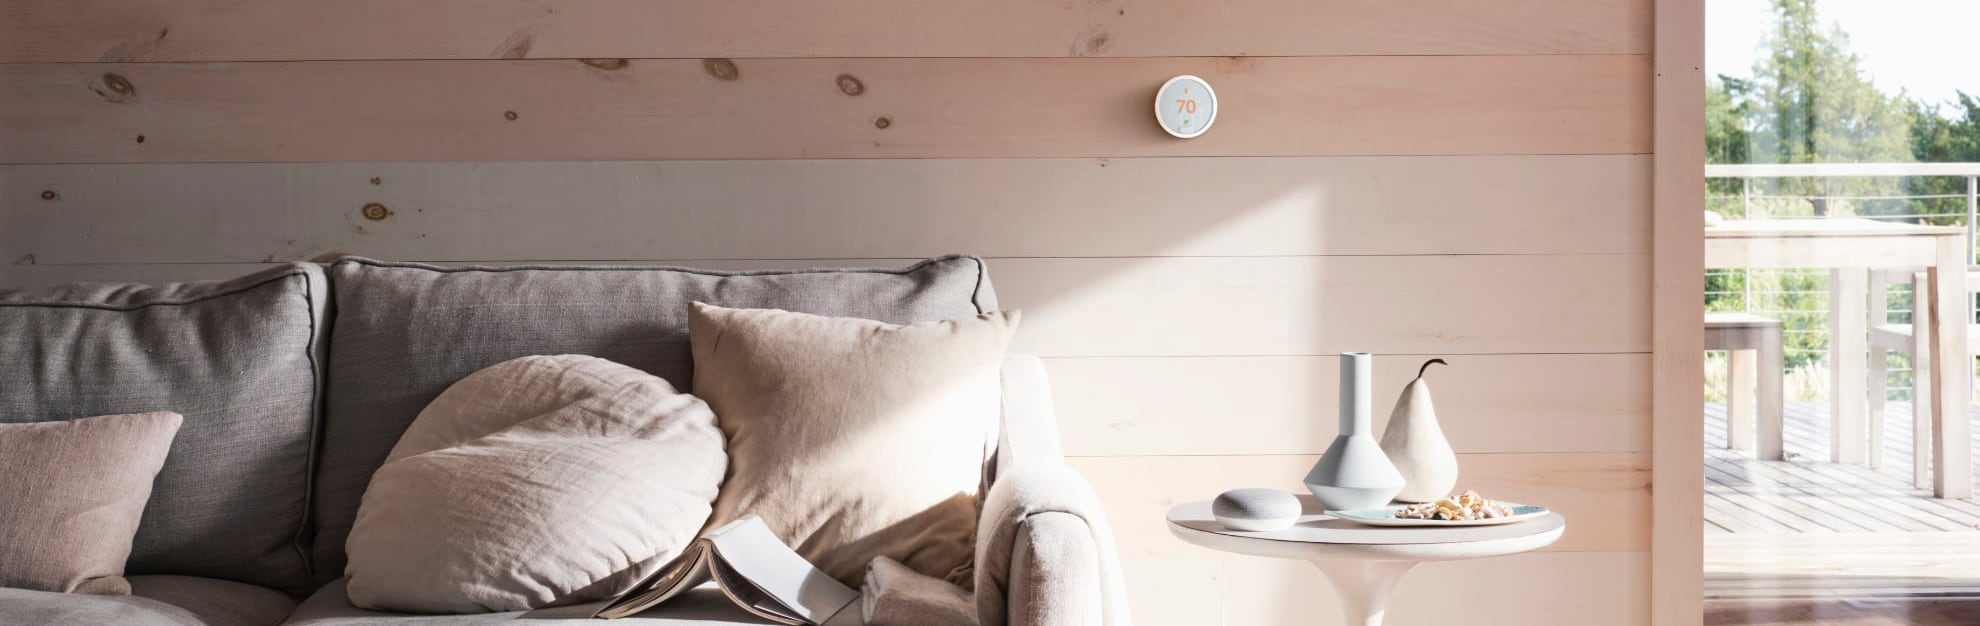 Vivint Home Automation in Cleveland